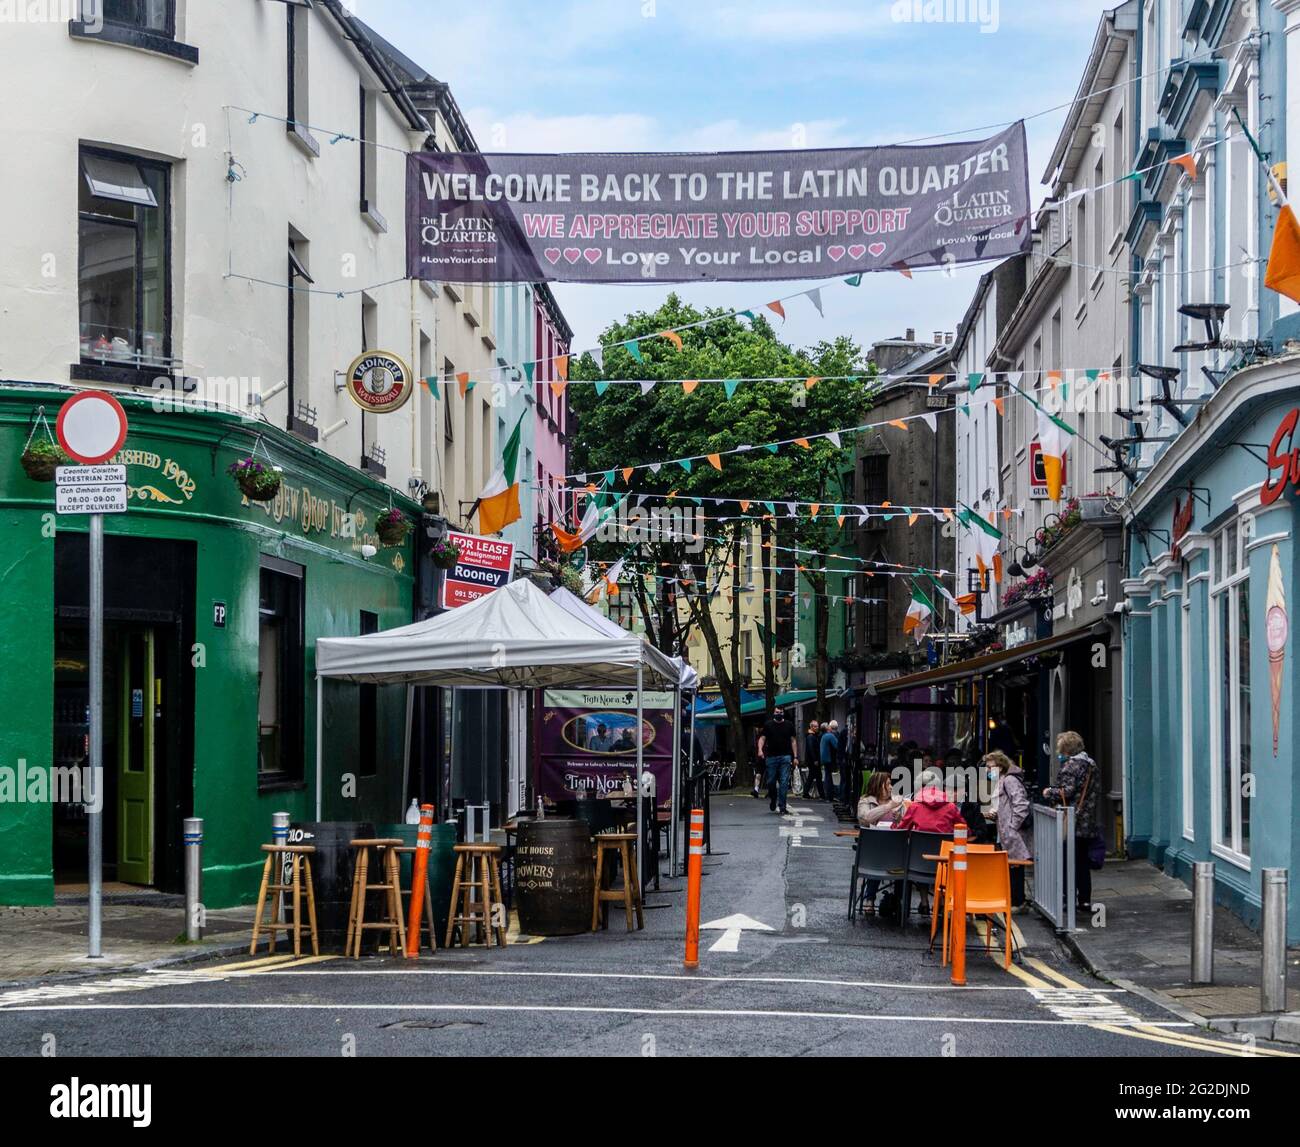 Outdoor dining in the Latin Quarter in Galway City, Ireland. A medieval part of the city, Traffic is now excluded to encourage outdoor hospitality. Stock Photo